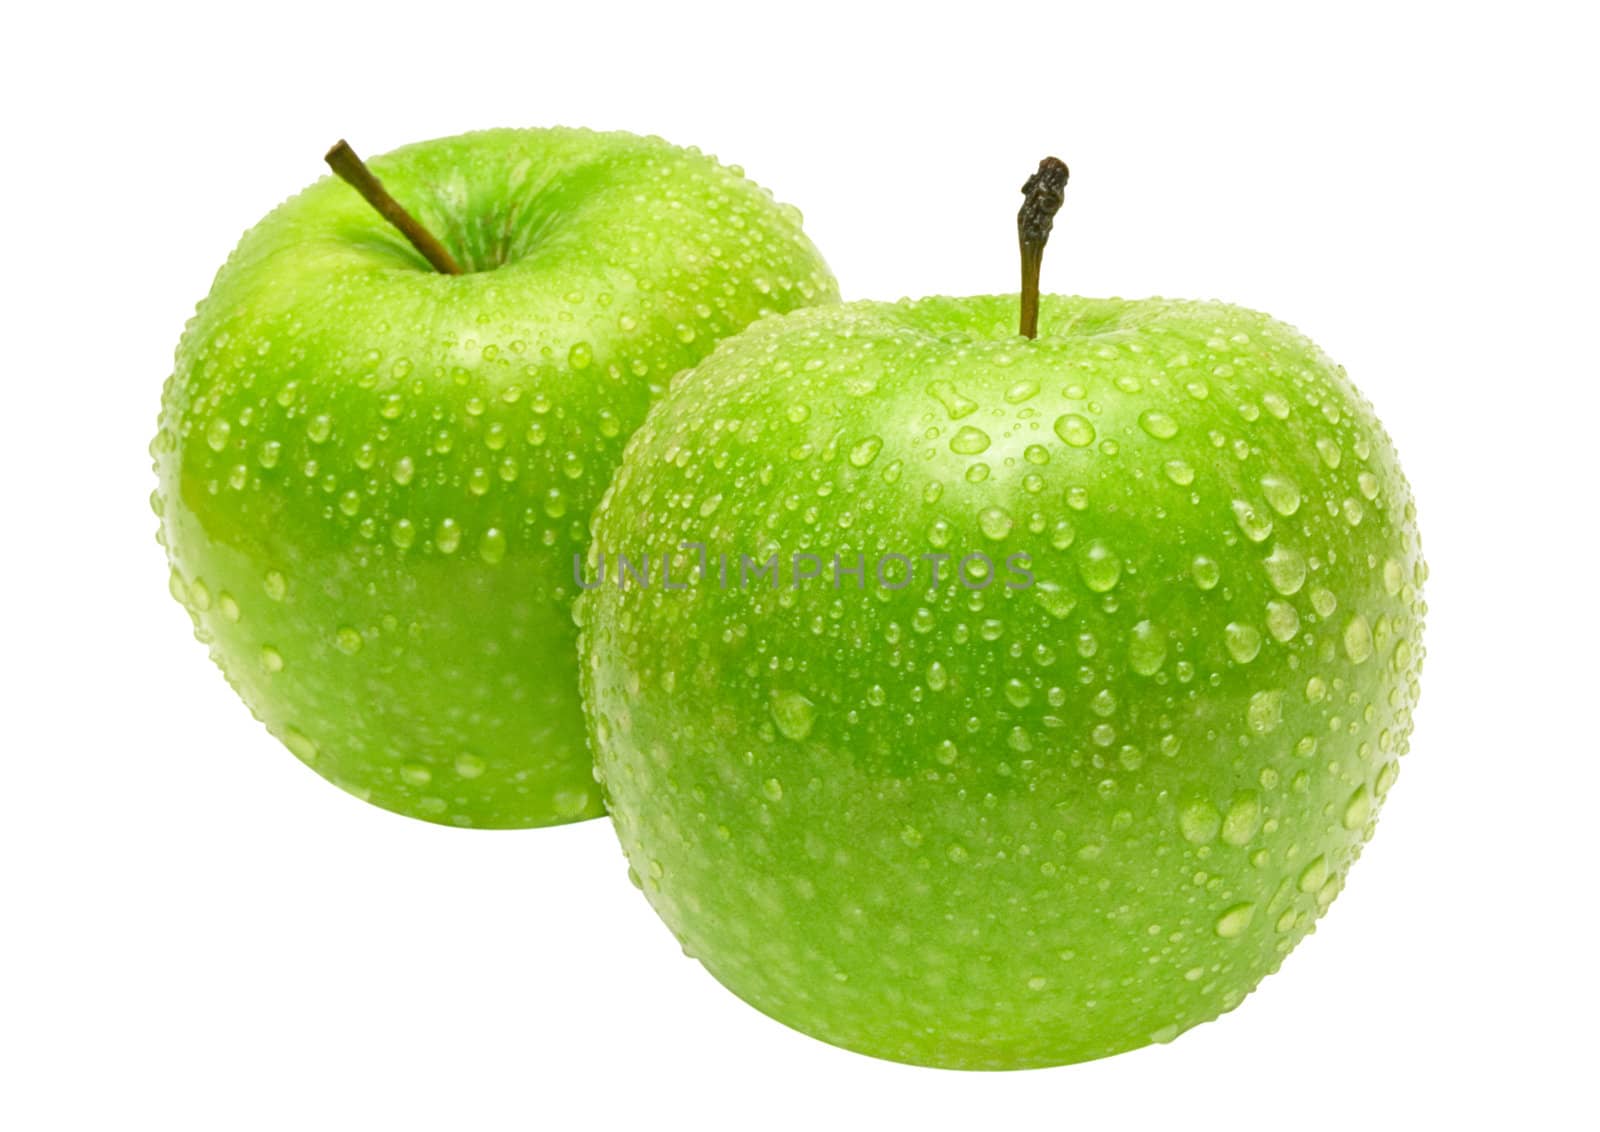 Two Green Apples with Clipping Path by winterling